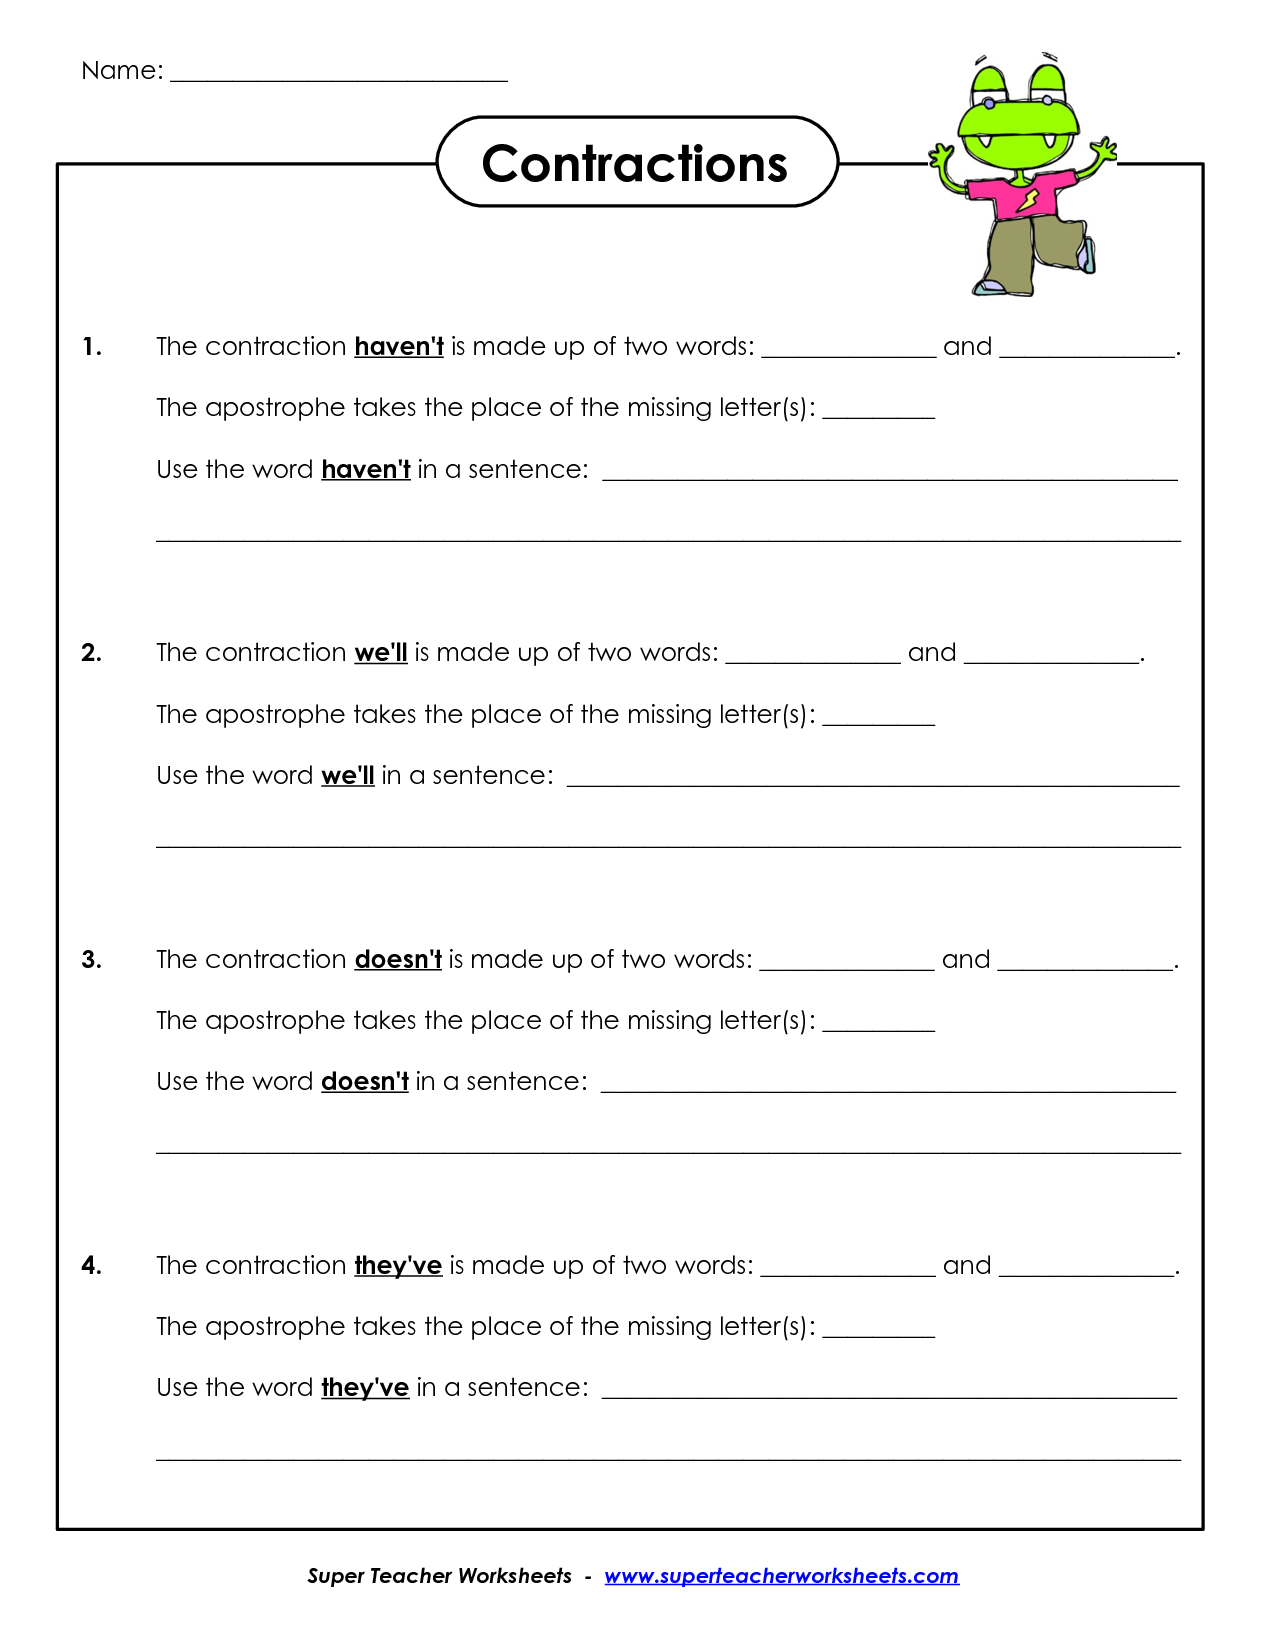 13 Best Images of Free Printable Worksheets Possessive Nouns